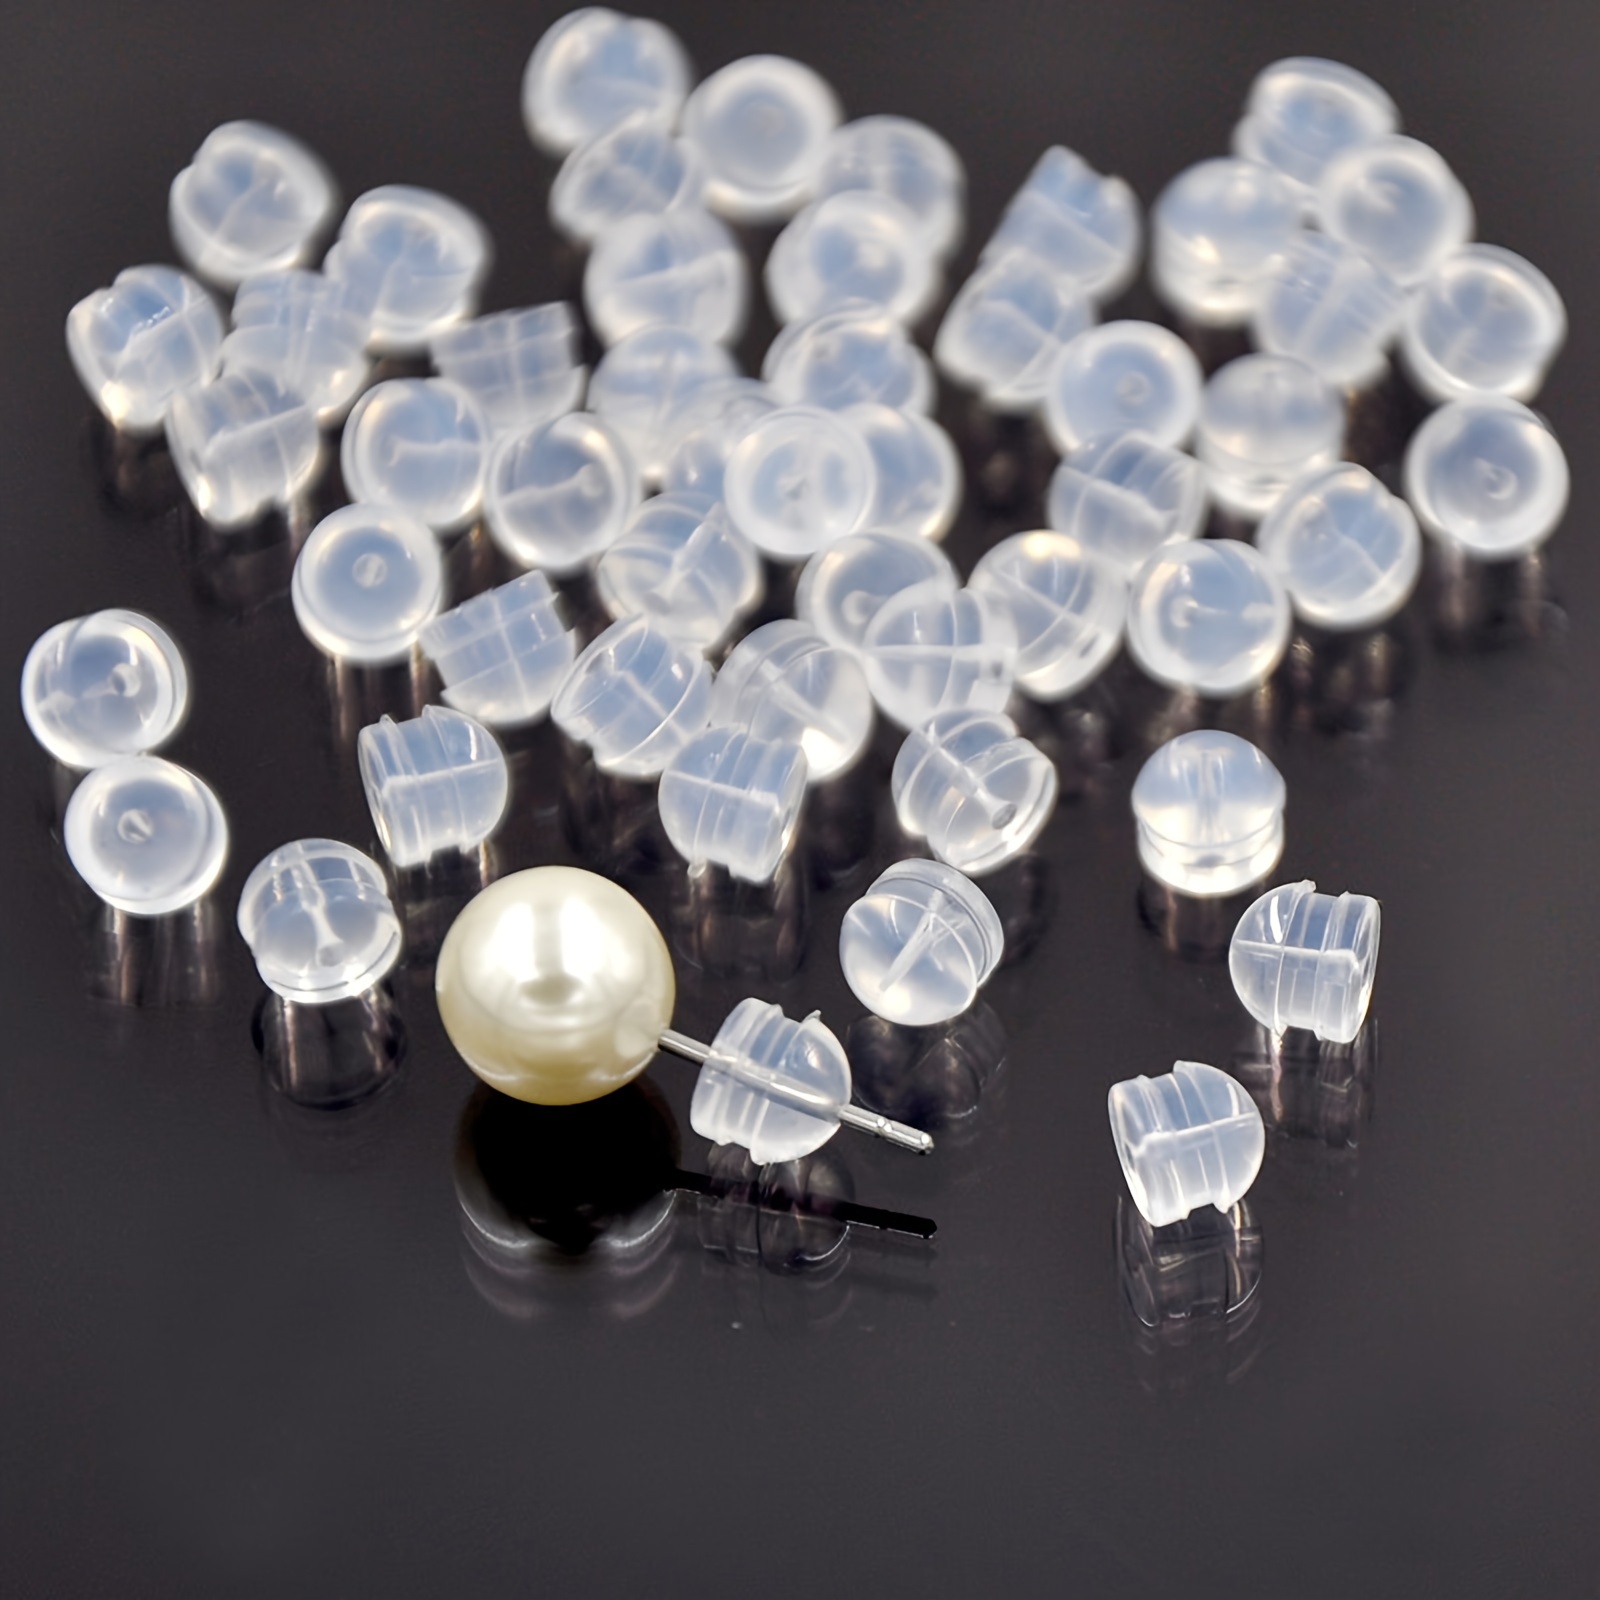  Silicone Earring Backs for Studs, 100PCS Soft Clear